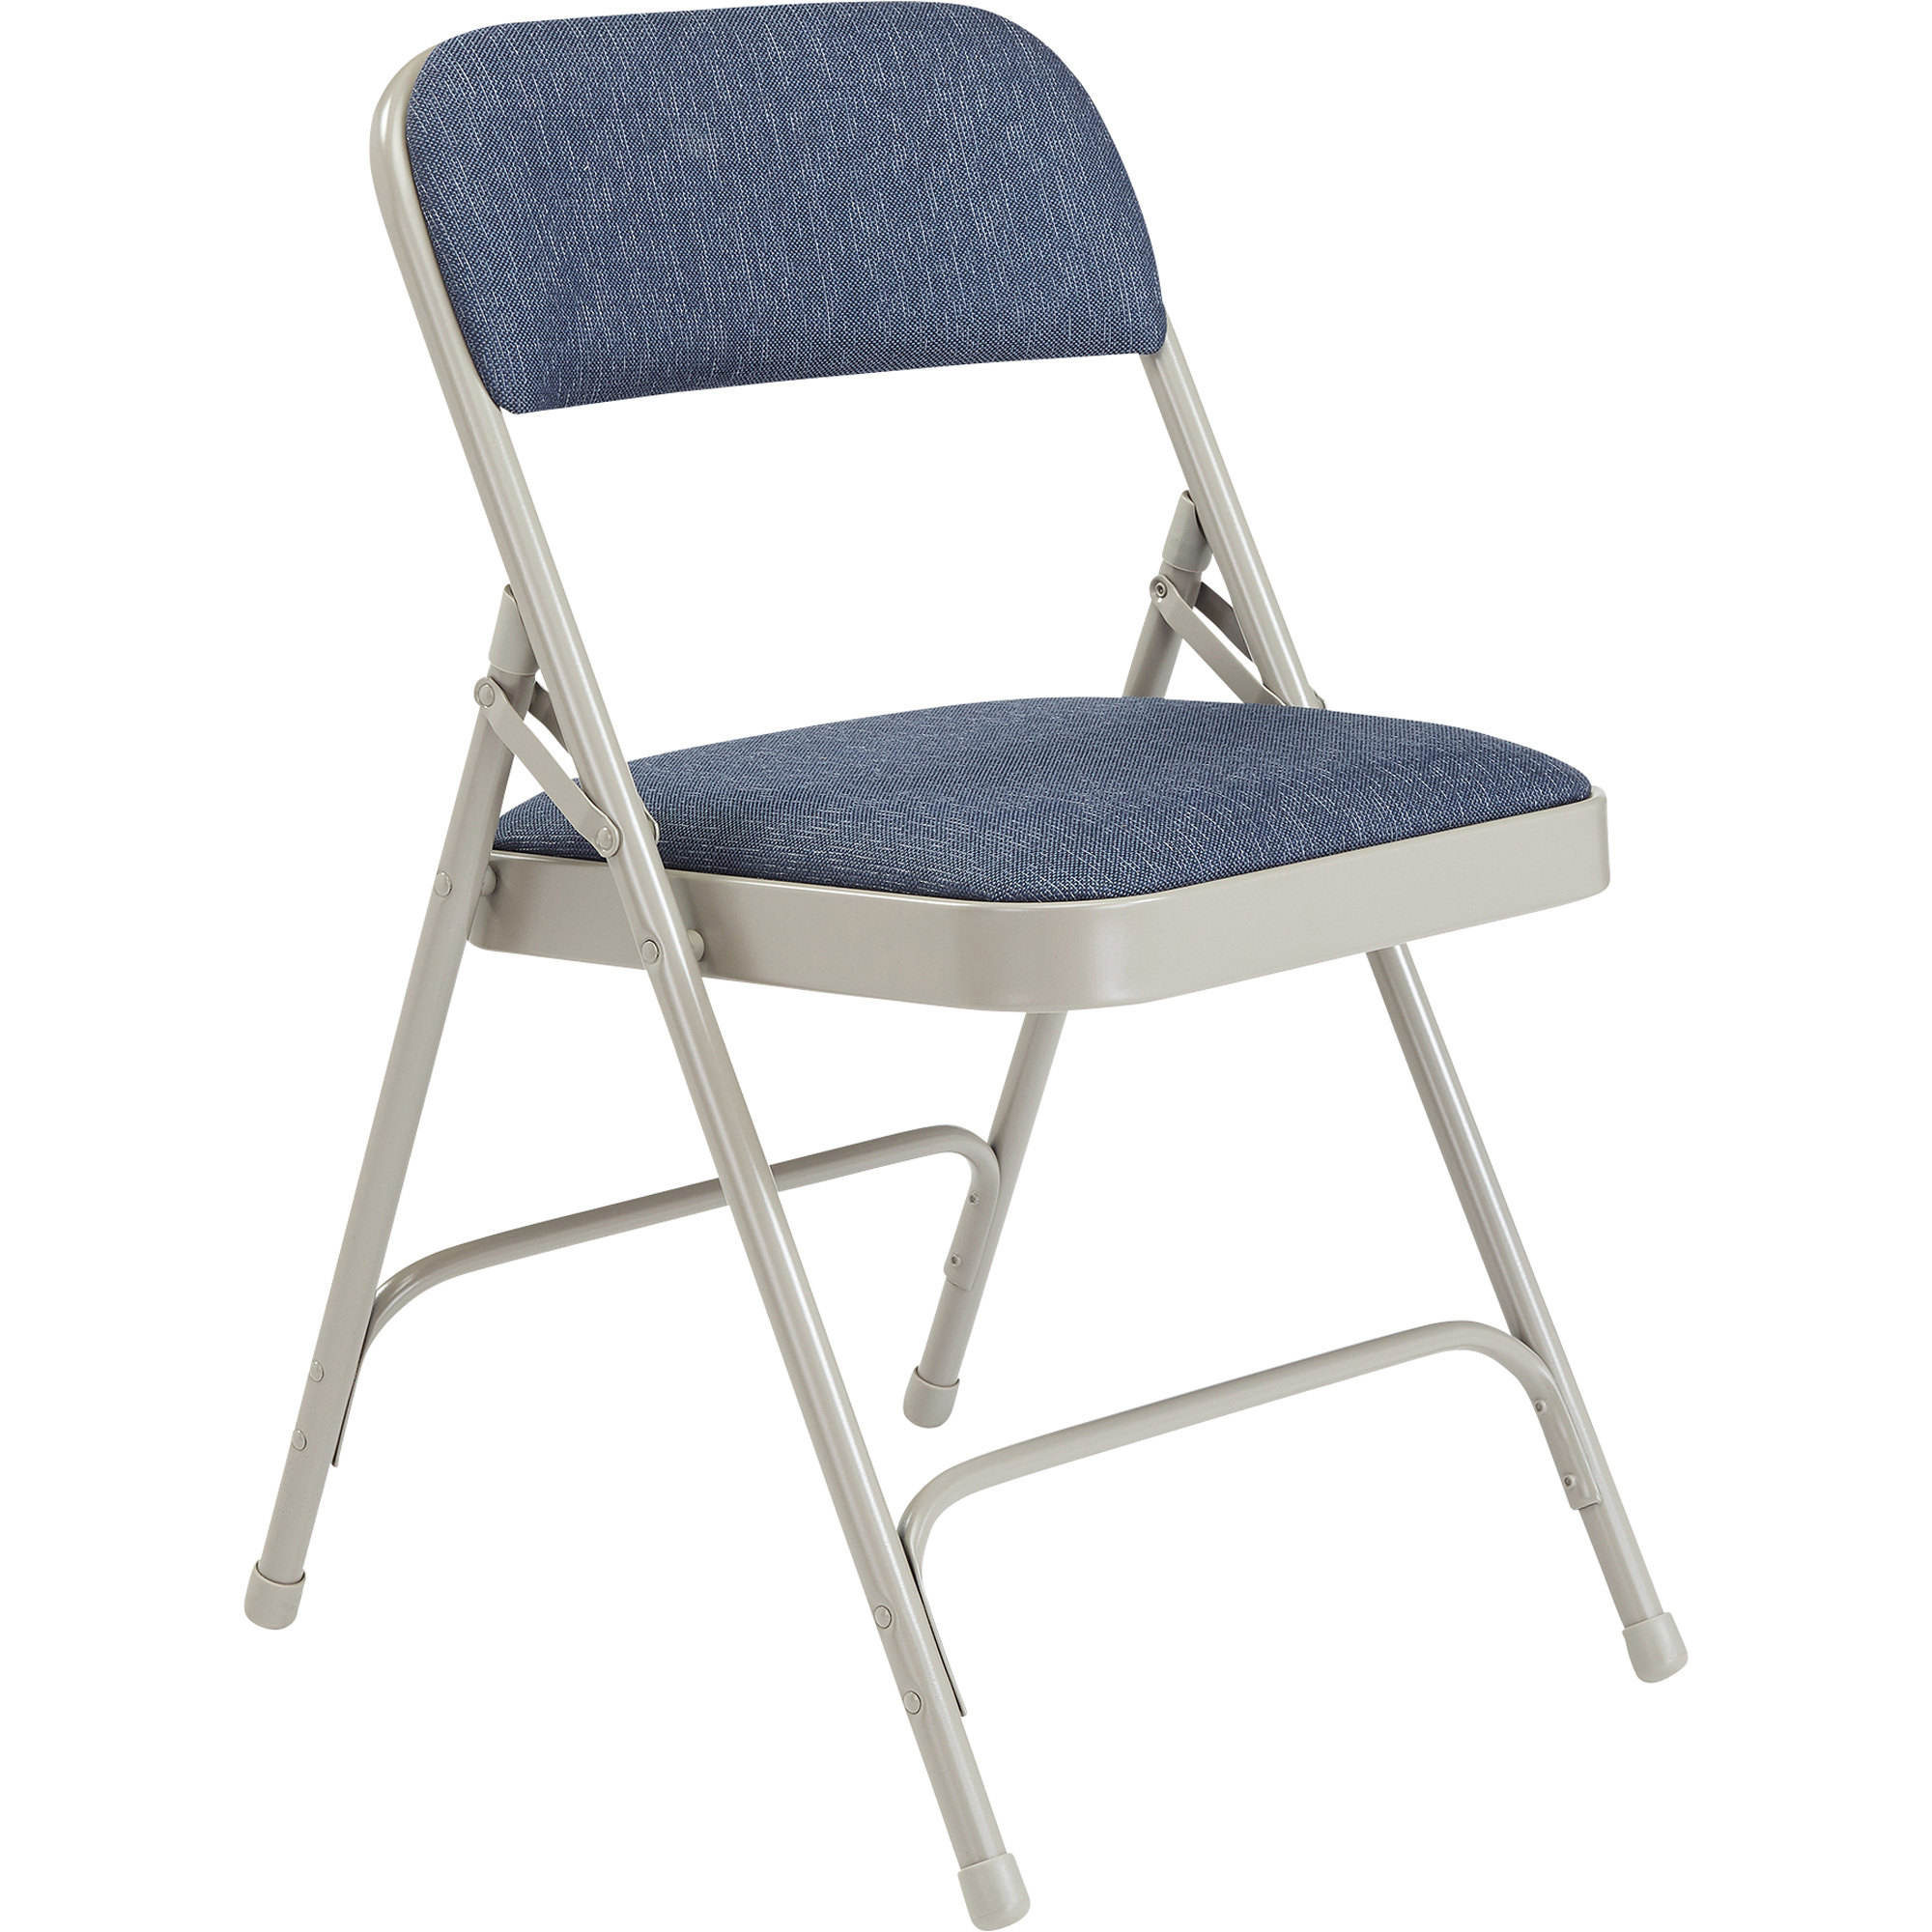 Steel Folding Chairs with Fabric Padded Seat and Back — Set of 4, Imperial Blue/Grey, Model - National Public Seating 2205